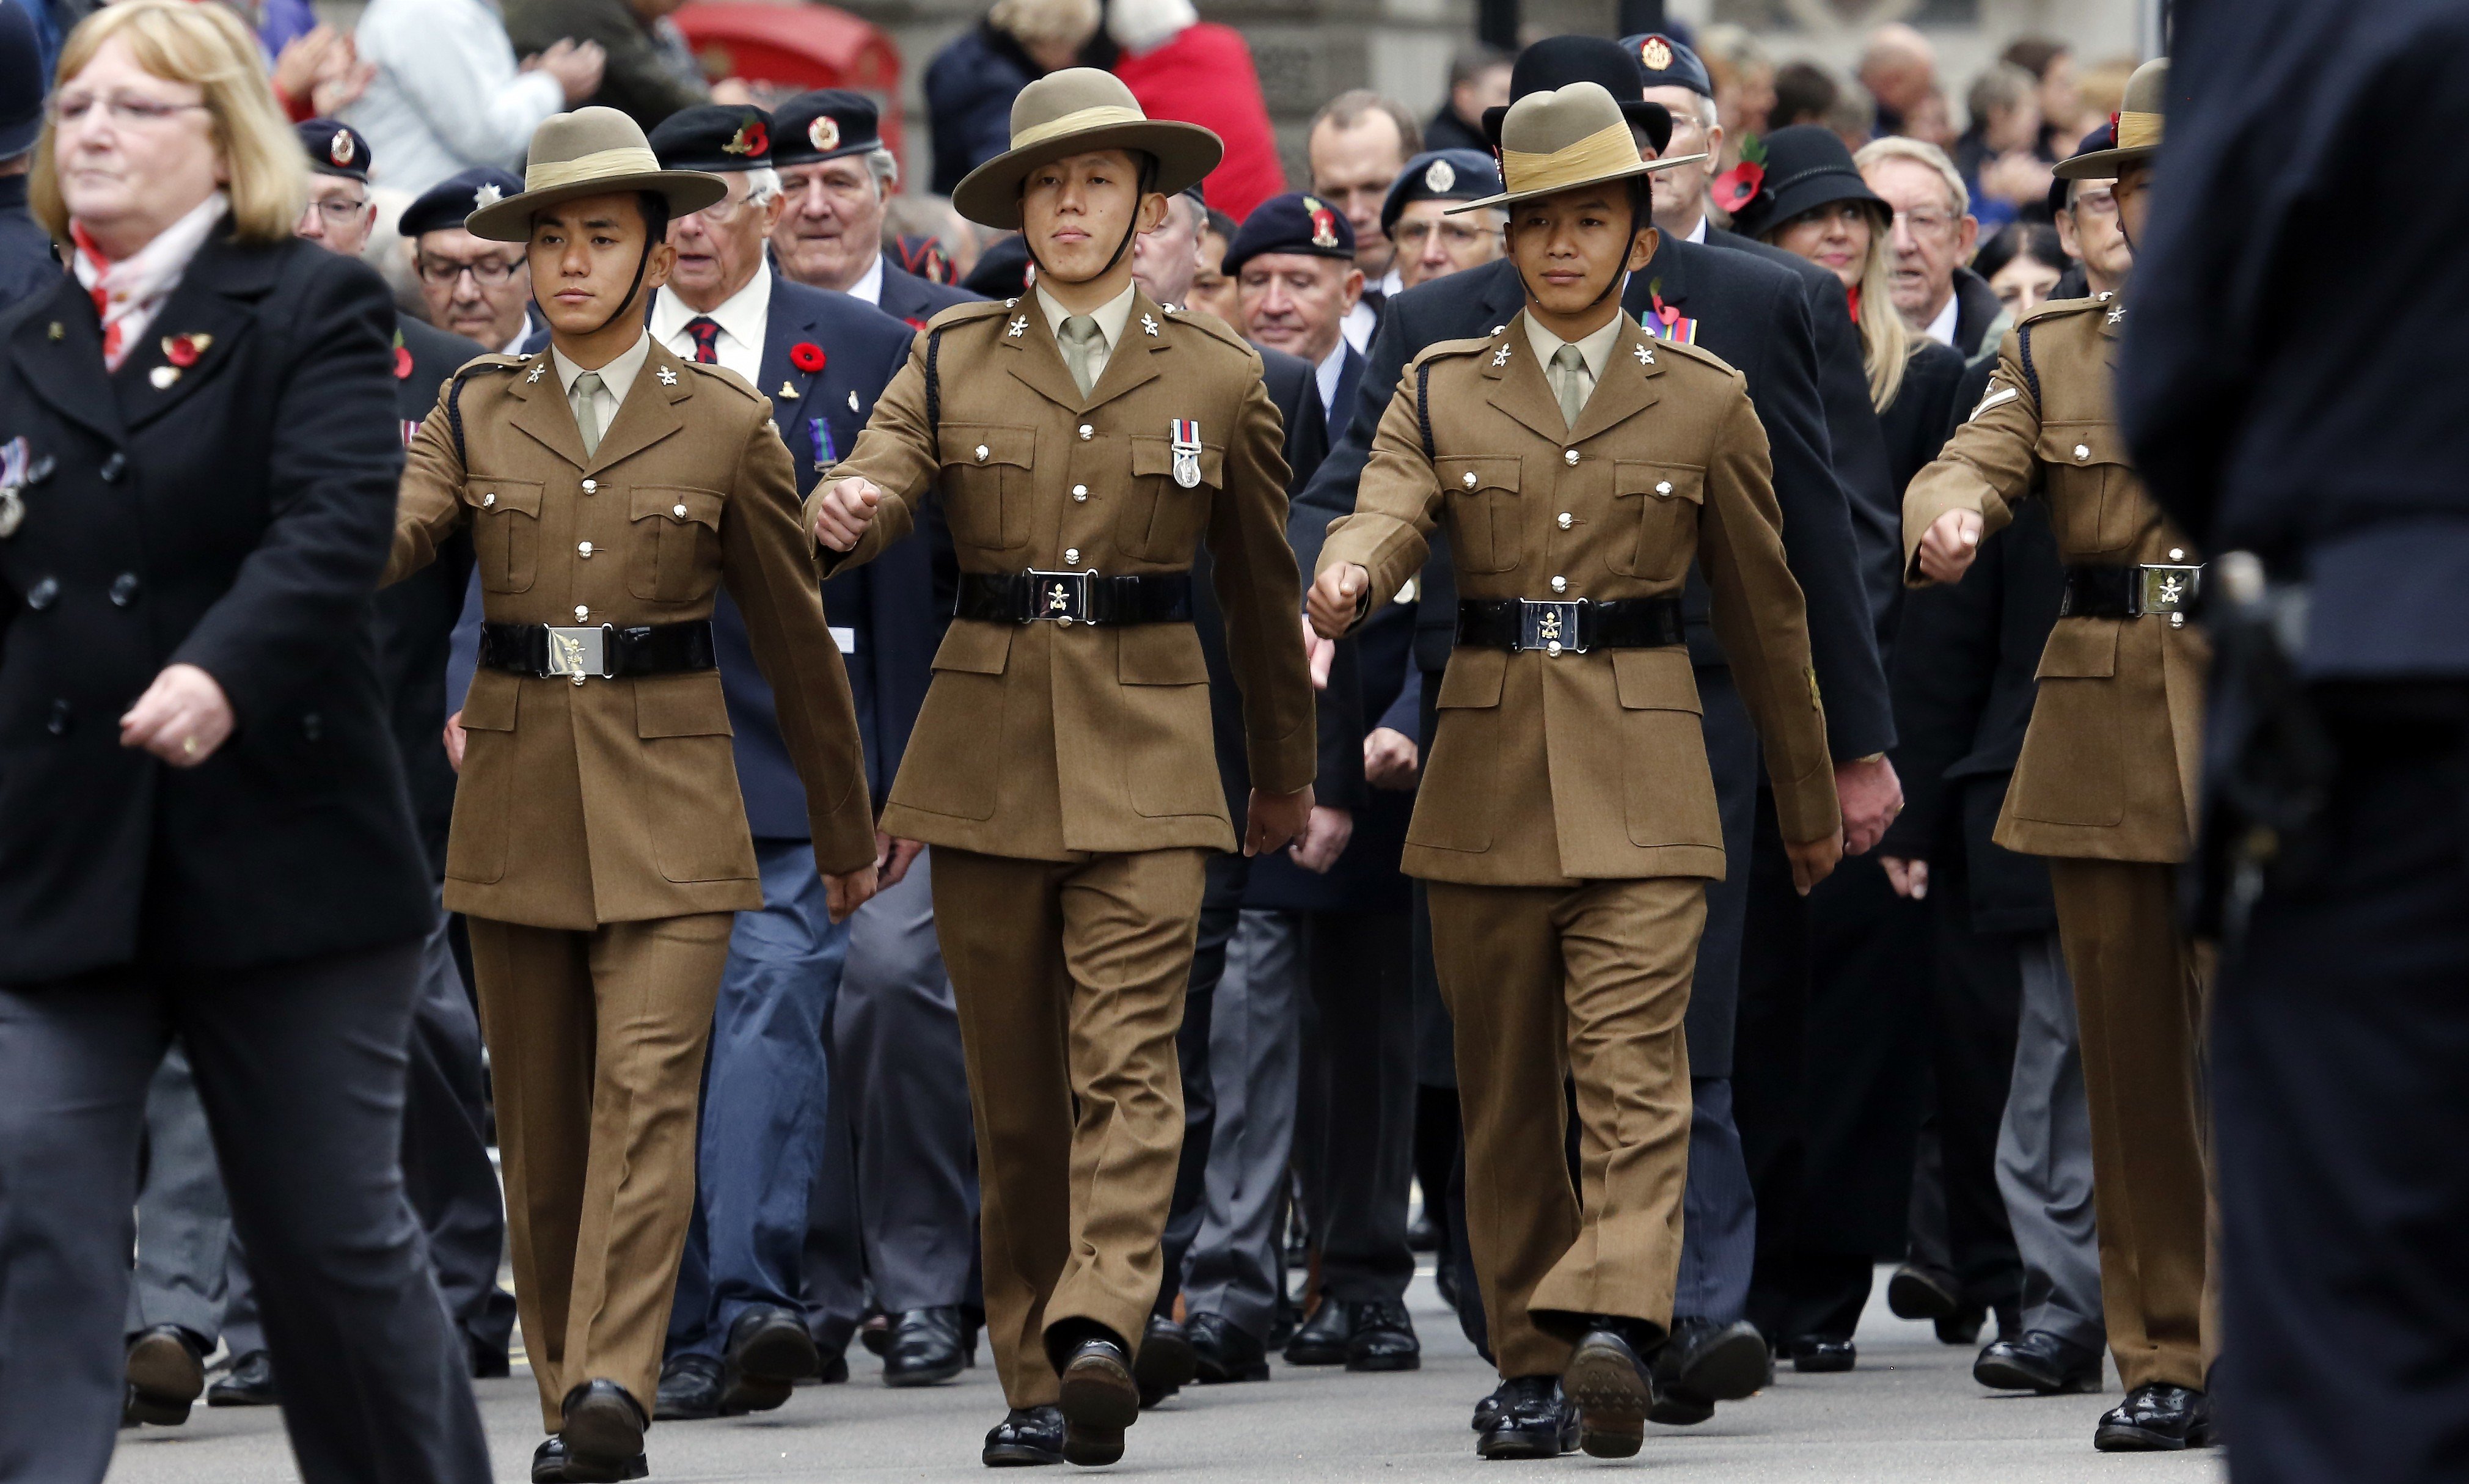 Gurkha soldiers take part in 2015 Remembrance Day celebrations in London. Photo: Handout